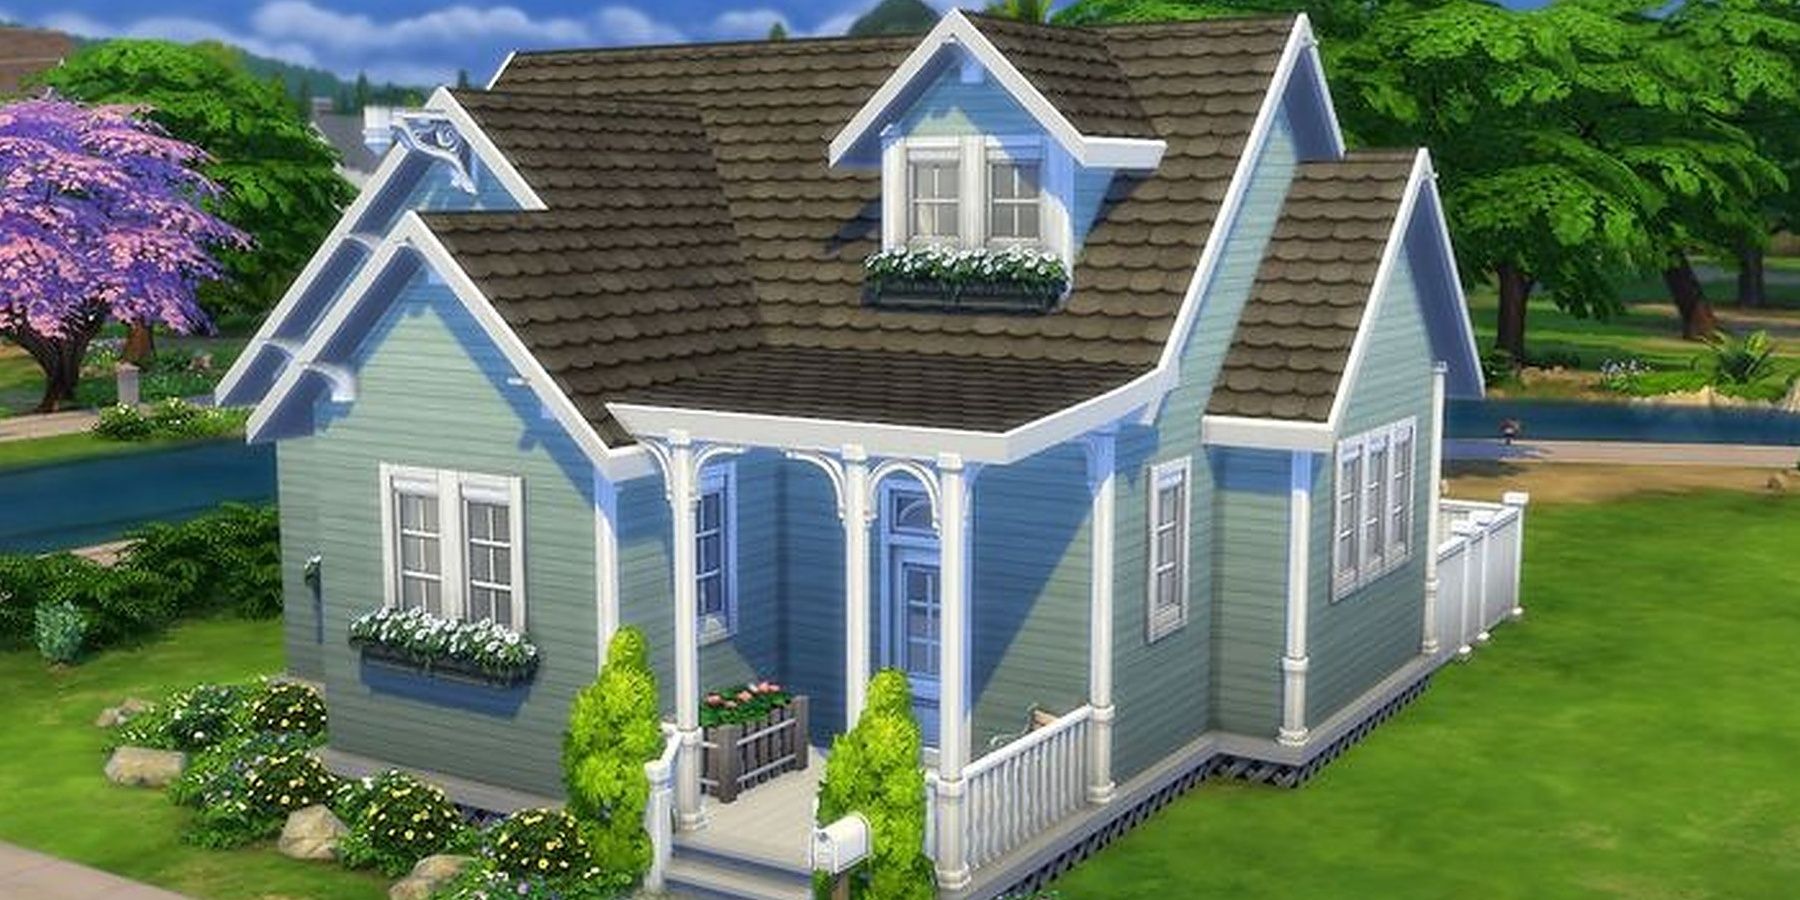 The Sims 4 house with a porch